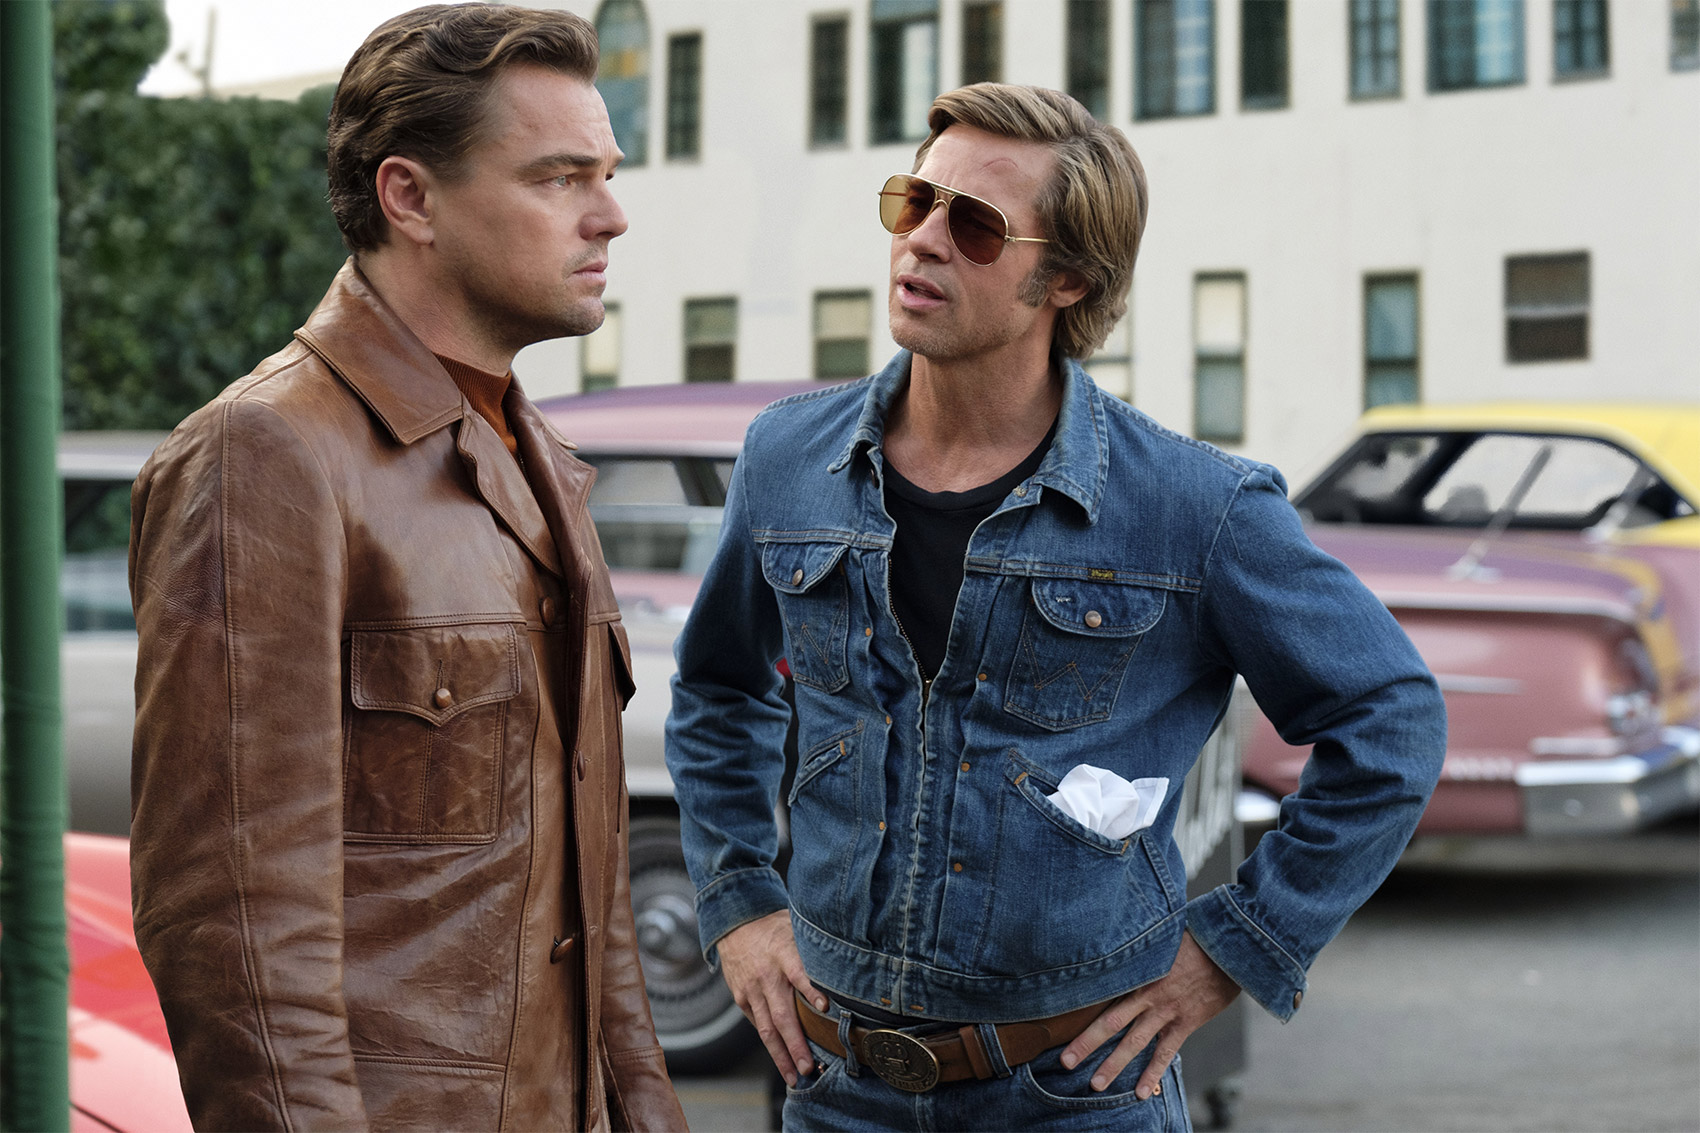 An Ode to the Golden Era – A Review of Once Upon a Time in Hollywood – More Movie Details